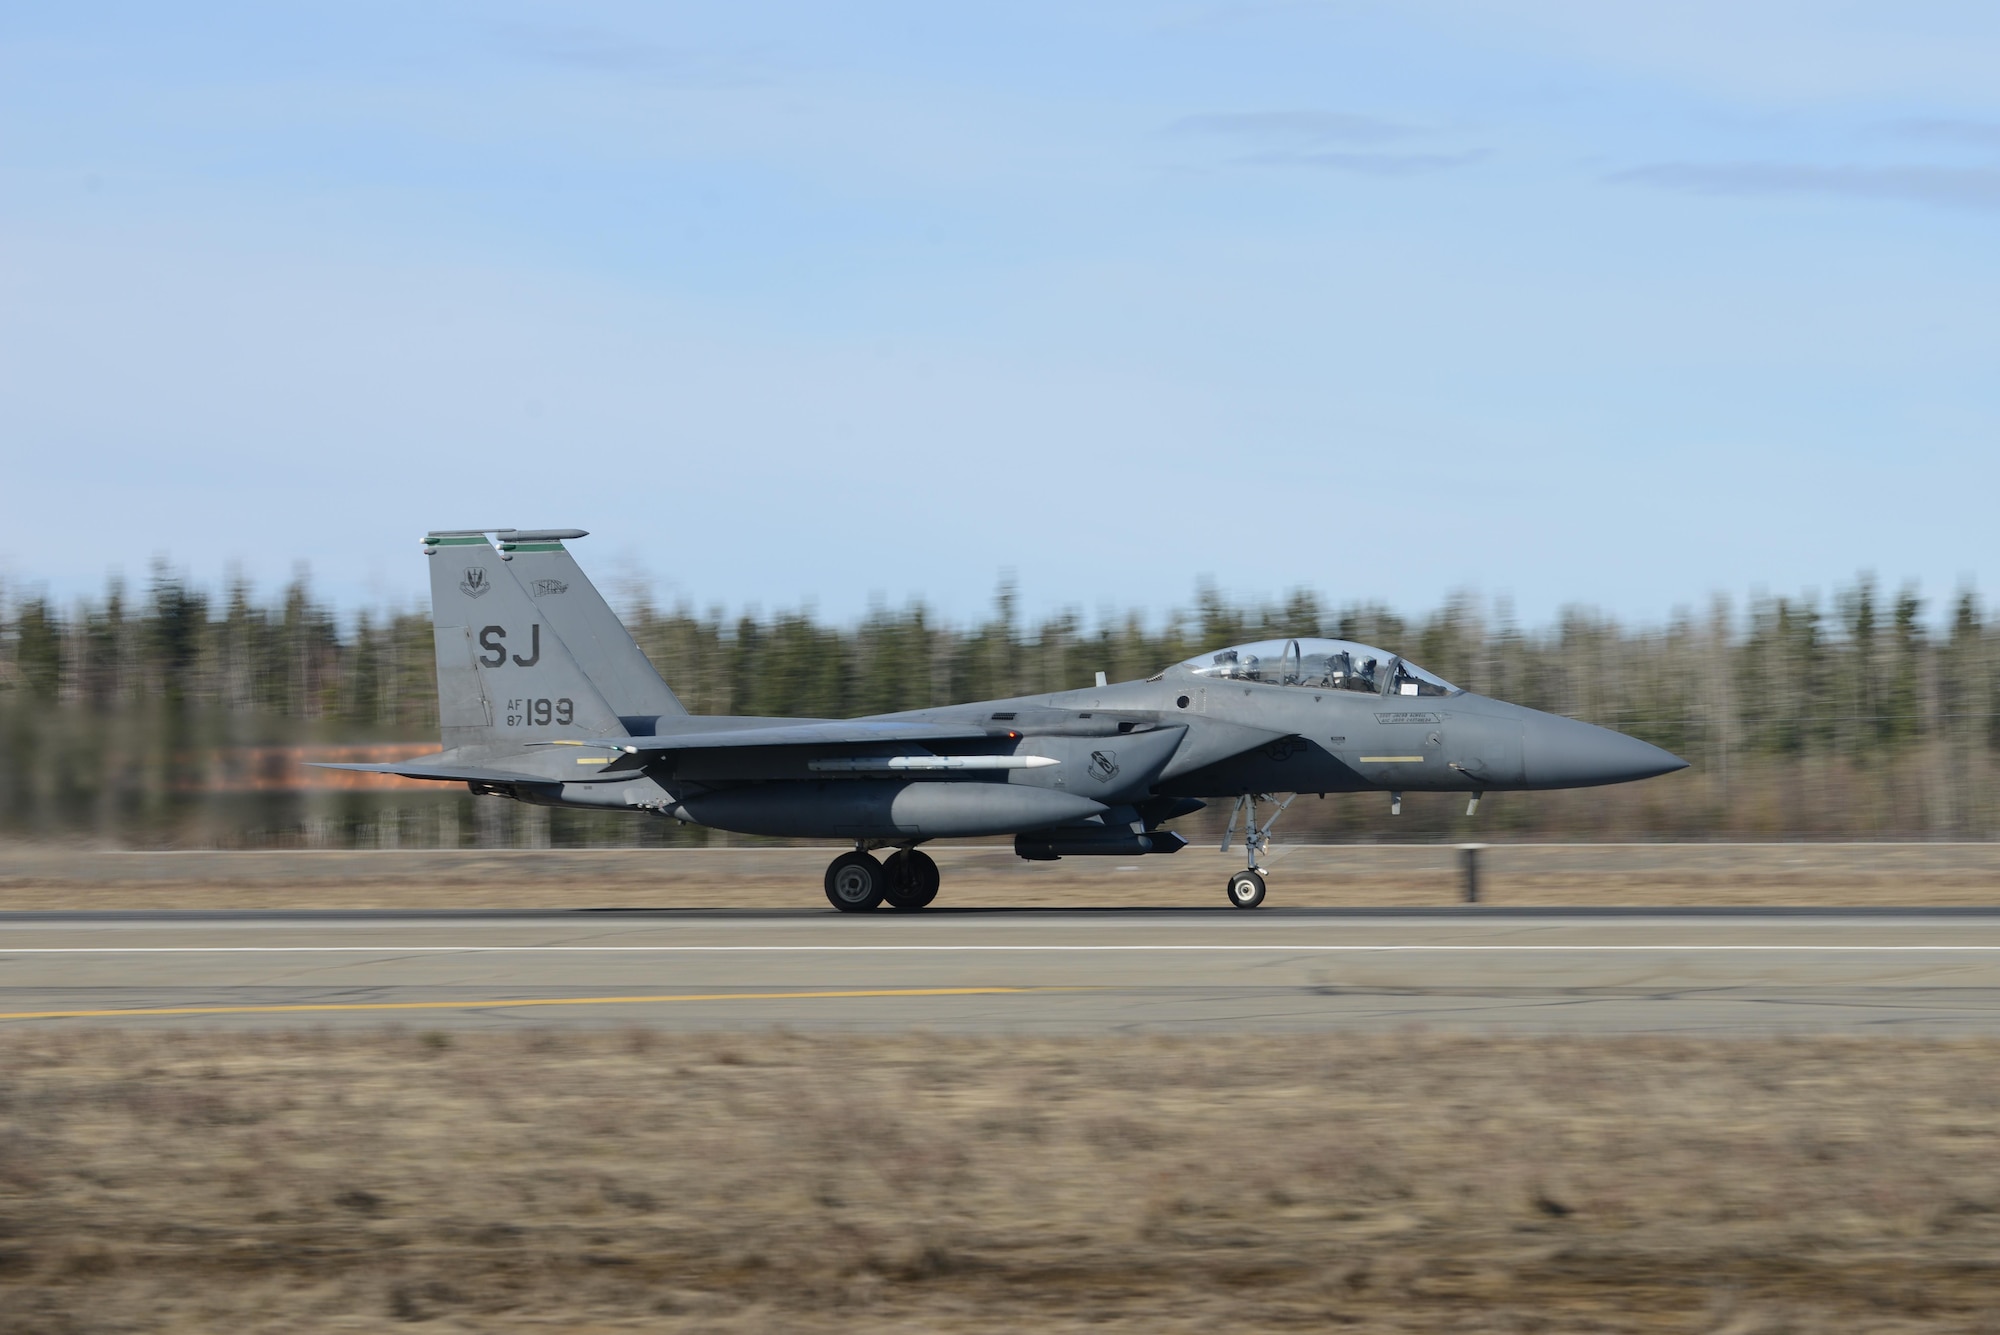 EIELSON AIR FORCE BASE, Alaska – A U.S. Air Force F-15E Strike Eagle dual-role fighter aircraft assigned to the 335th Fighter Squadron, Seymour Johnson Air Force Base, N.C., takes off for a sortie from Eielson Air Force Base, Alaska, May 1, 2017 during NORTHERN EDGE 2017 (NE17). NE17 is Alaska’s premier joint training exercise designed to practice operations, techniques and procedures as well as enhance interoperability among the services. Thousands of participants from all the services, Airmen, Soldiers, Sailors, Marines and Coast Guardsmen from active duty, Reserve and National Guard units are involved. (U.S. Air Force photo/Staff Sgt. Ashley Nicole Taylor)